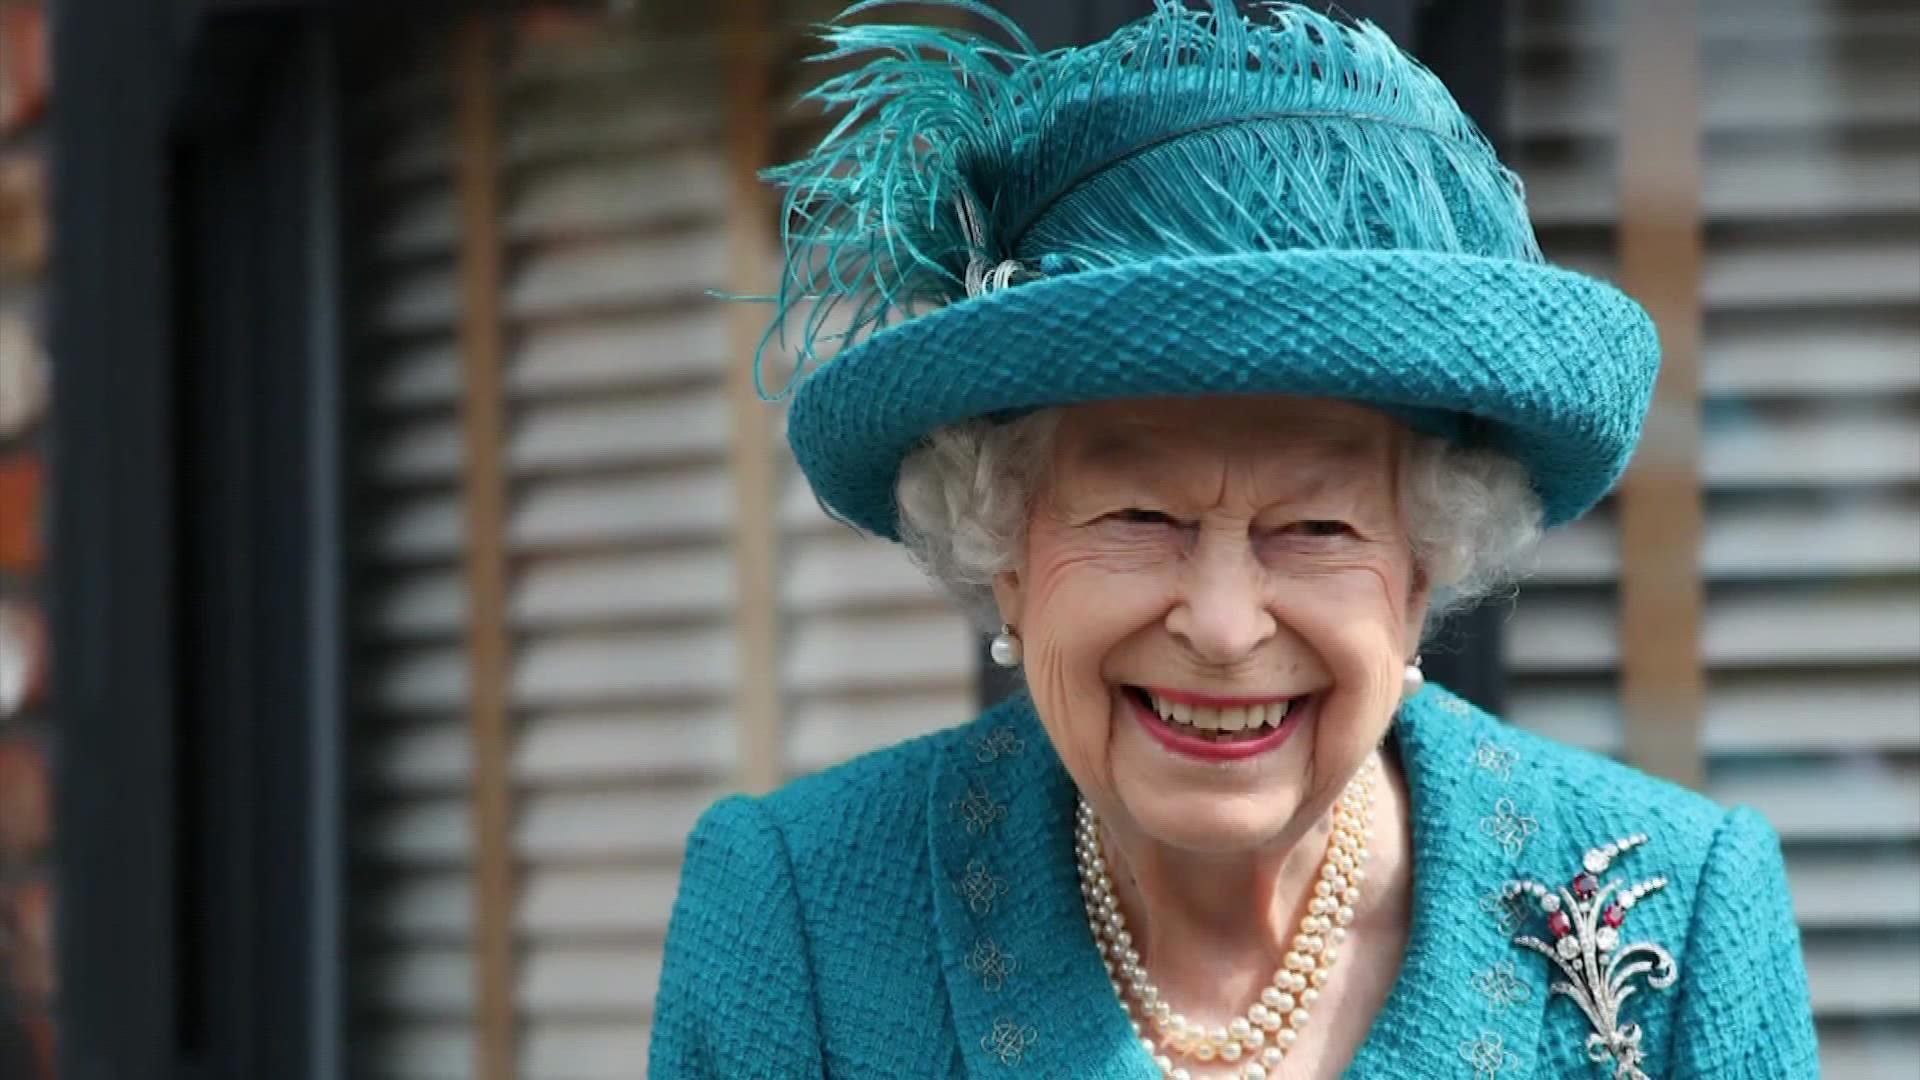 British residents woke up Friday without the only queen most have ever known. Meanwhile, King Charles III returned to London for his first full day on the throne.